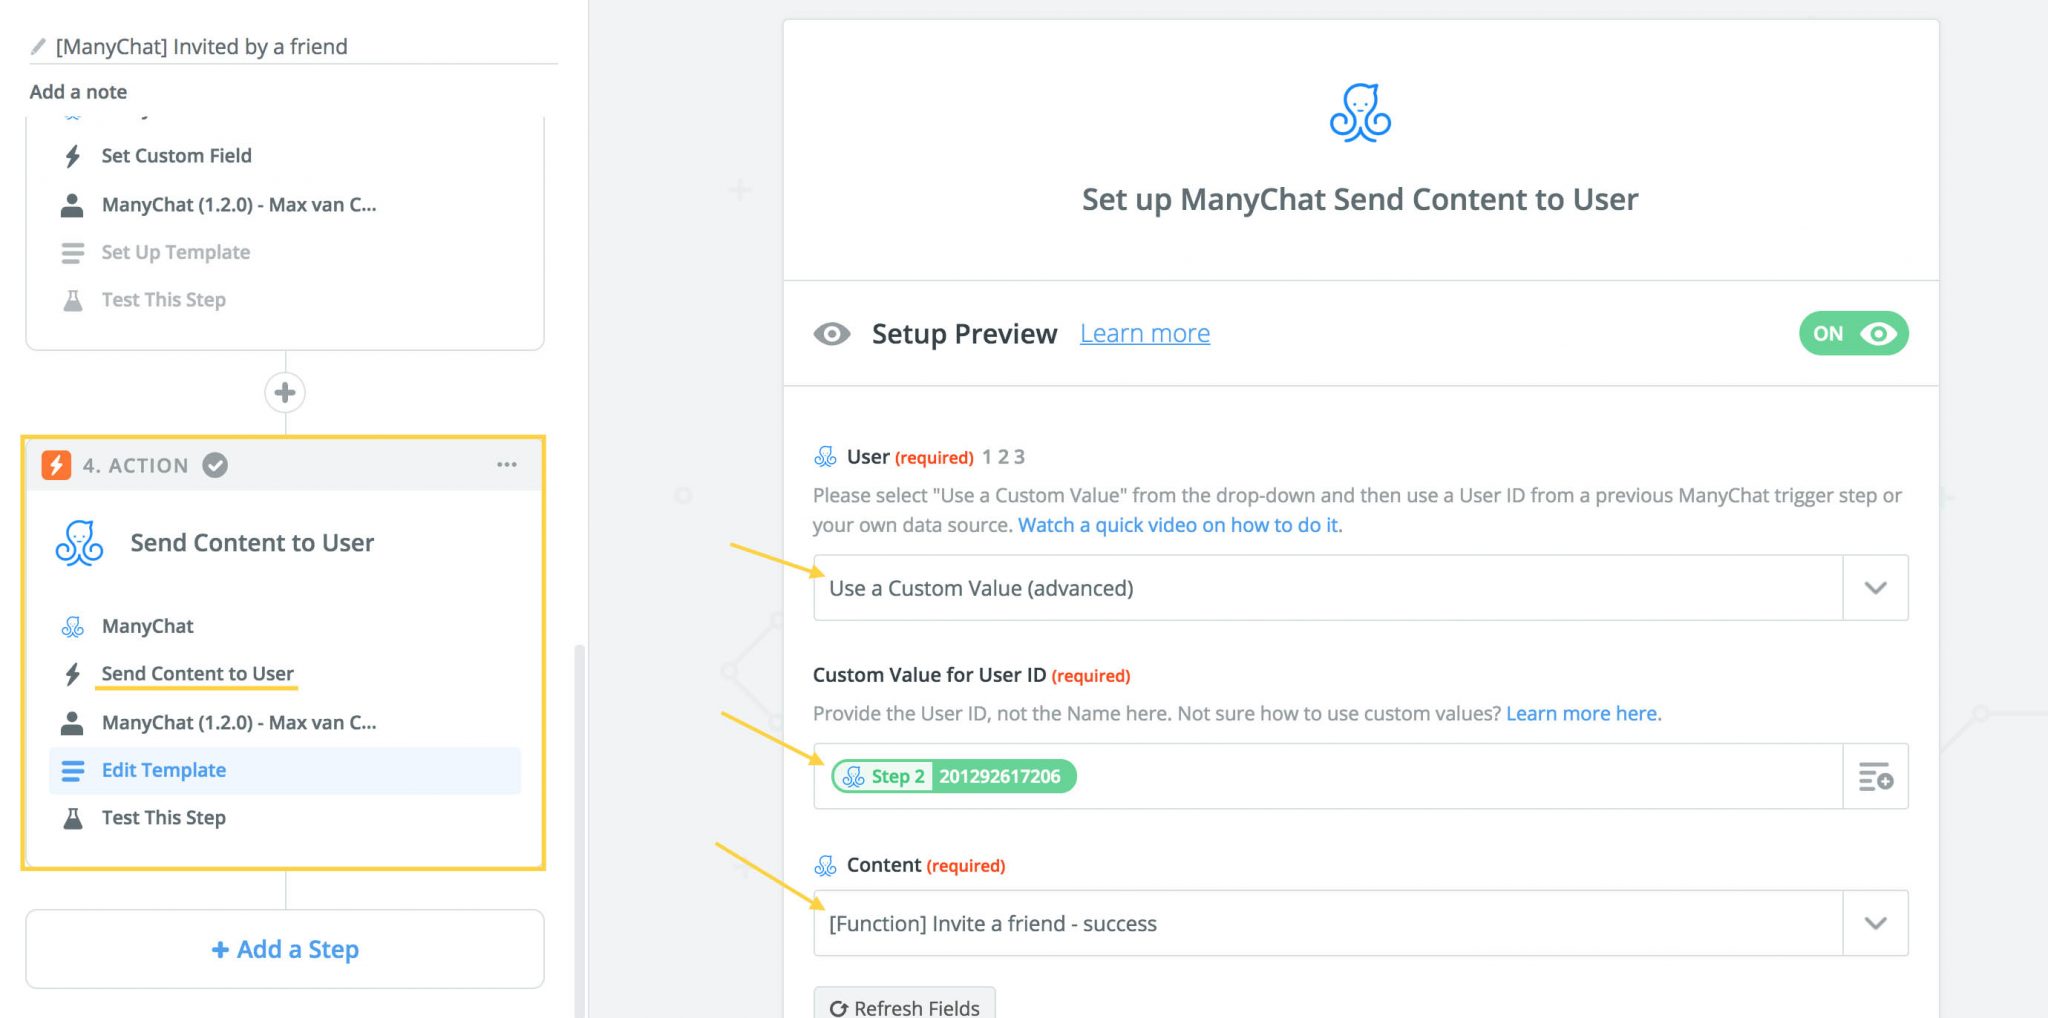 send content to user success message